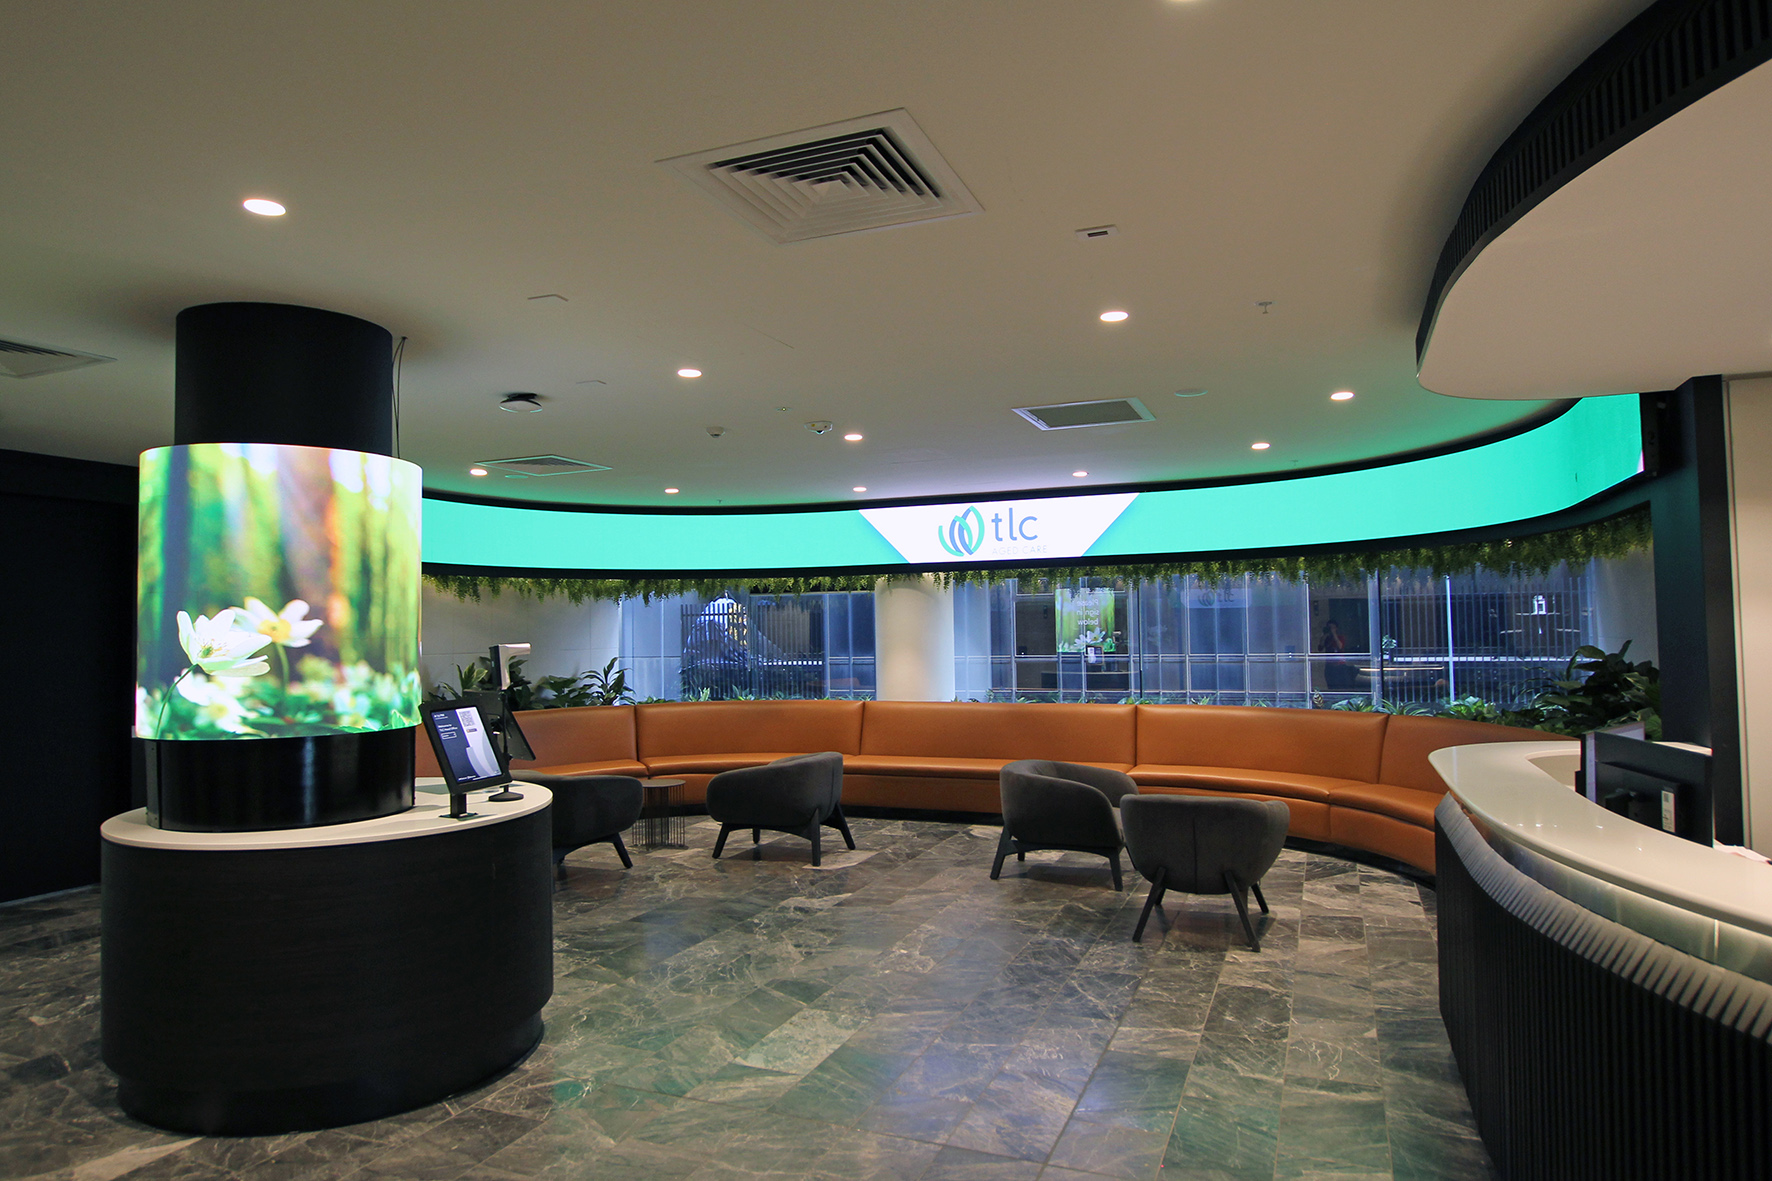 New VuePix Infiled Digital LED Screen for TLC Aged Care